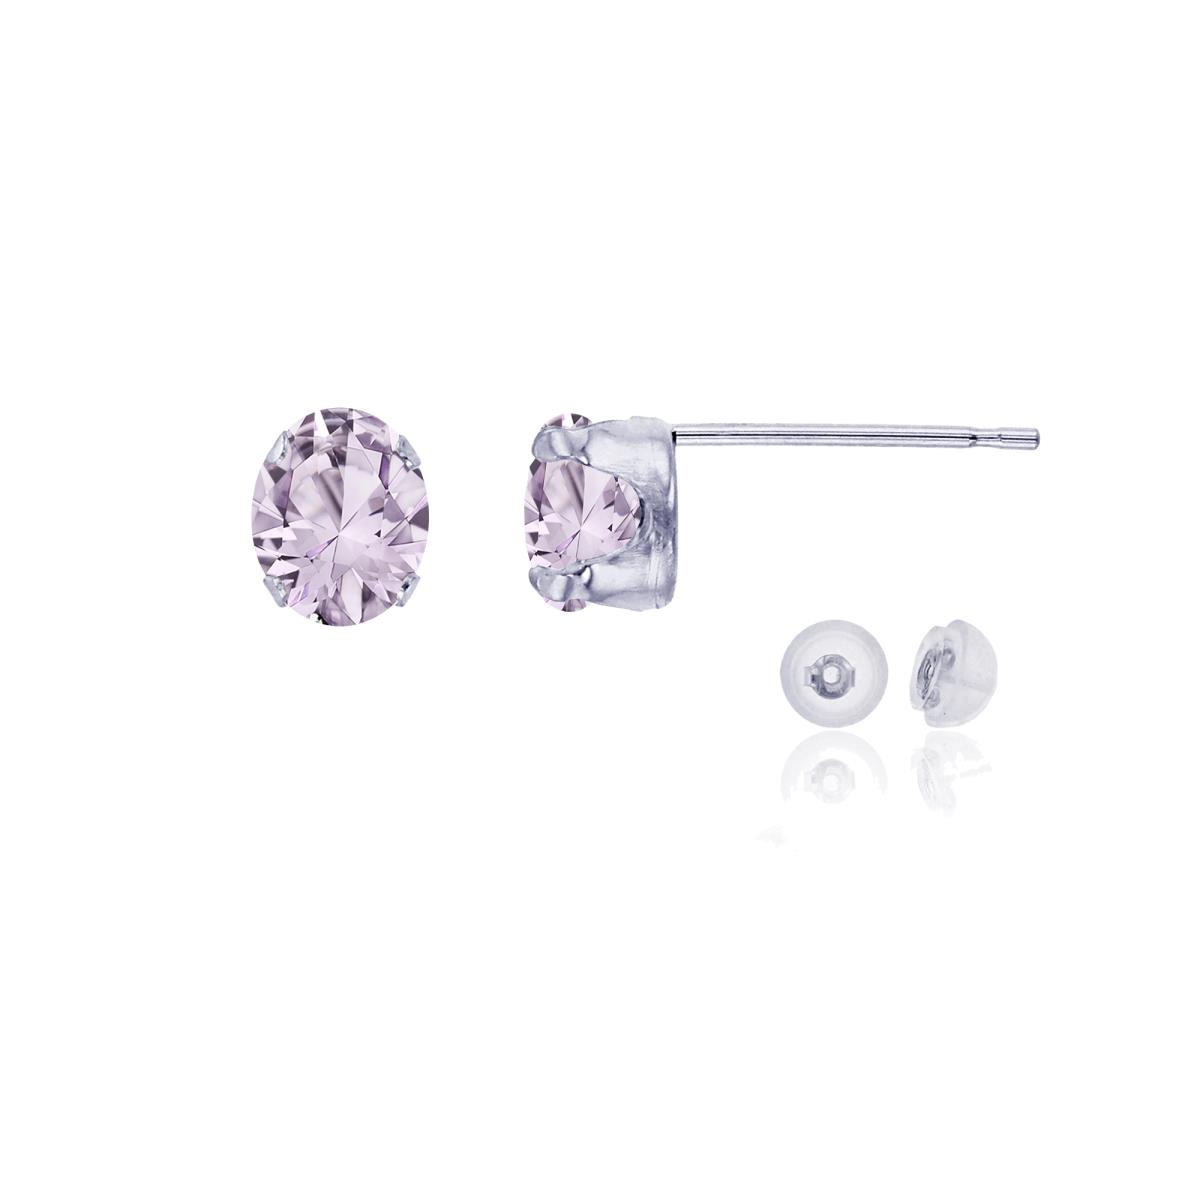 14K White Gold 6x4mm Oval Rose De France Stud Earring with Silicone Back